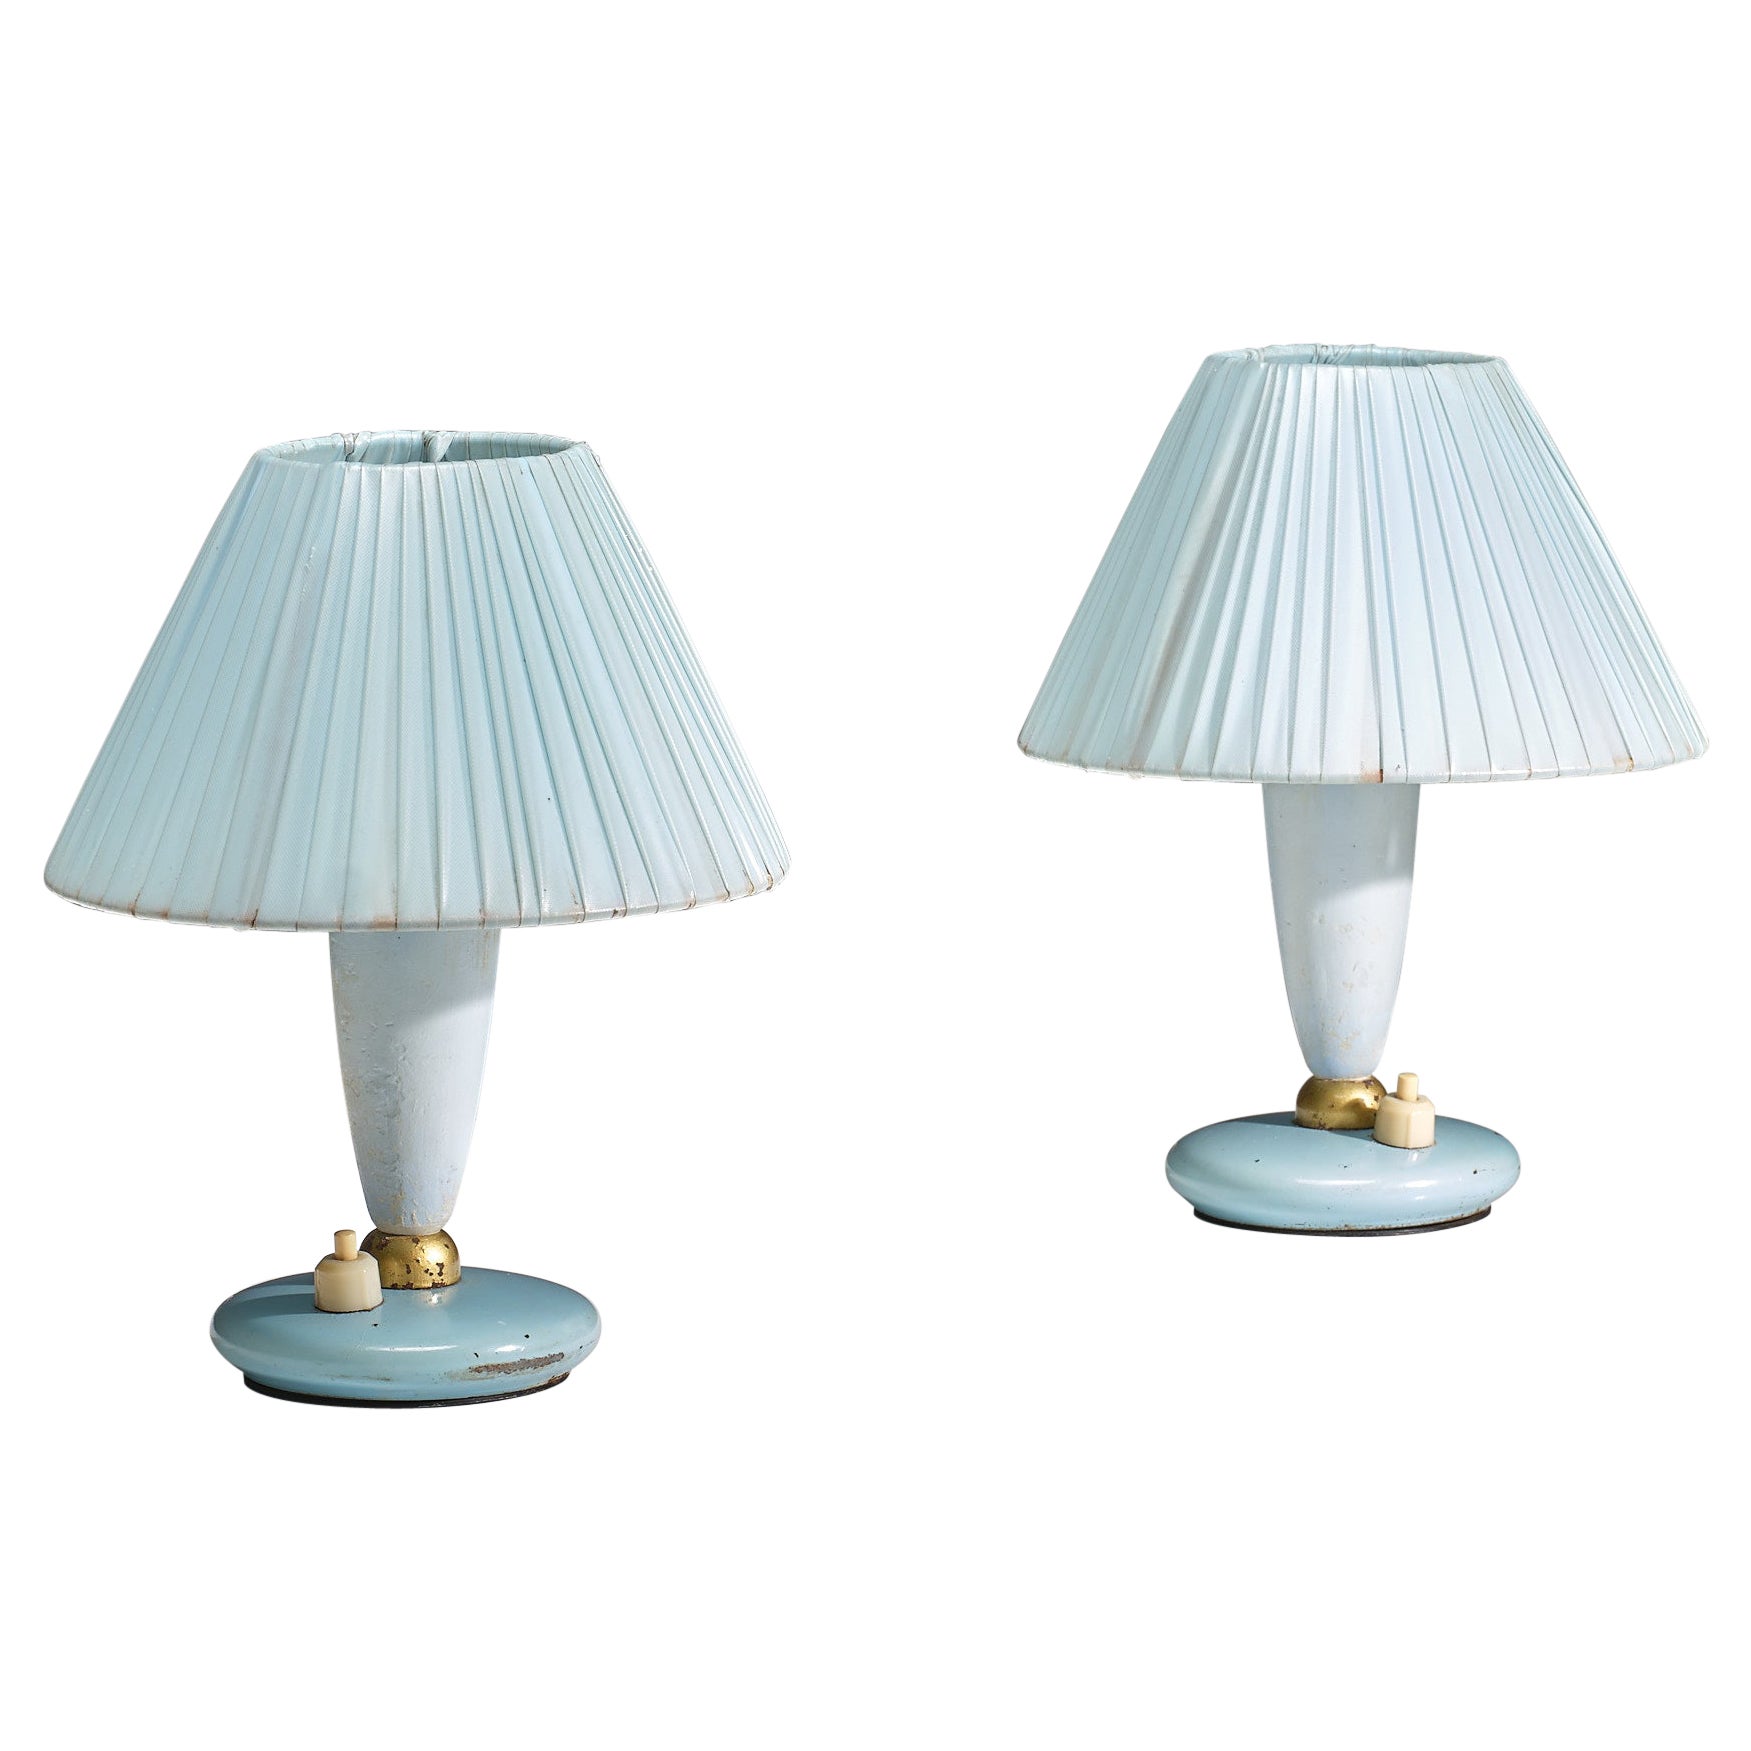 Pair of 1950s Italian Midcentury Modern Blue Bedside Lamps For Sale